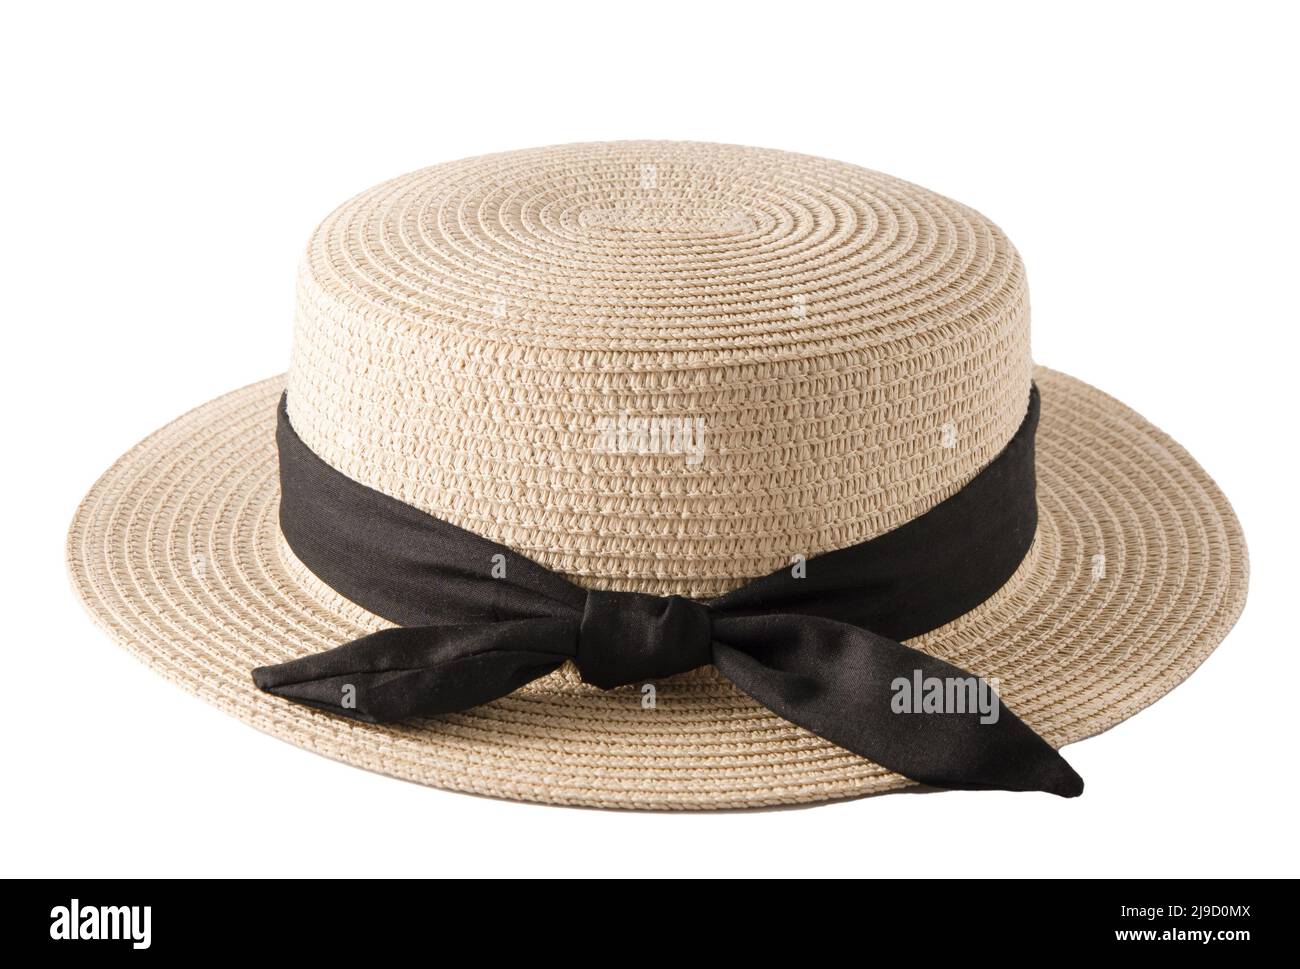 https://c8.alamy.com/comp/2J9D0MX/small-brimmed-straw-boater-hat-with-black-band-canotier-summer-french-straw-hat-of-rigid-shape-with-a-cylindrical-crown-and-straight-rather-narrow-brim-concept-summer-fashion-clothing-accessories-2J9D0MX.jpg